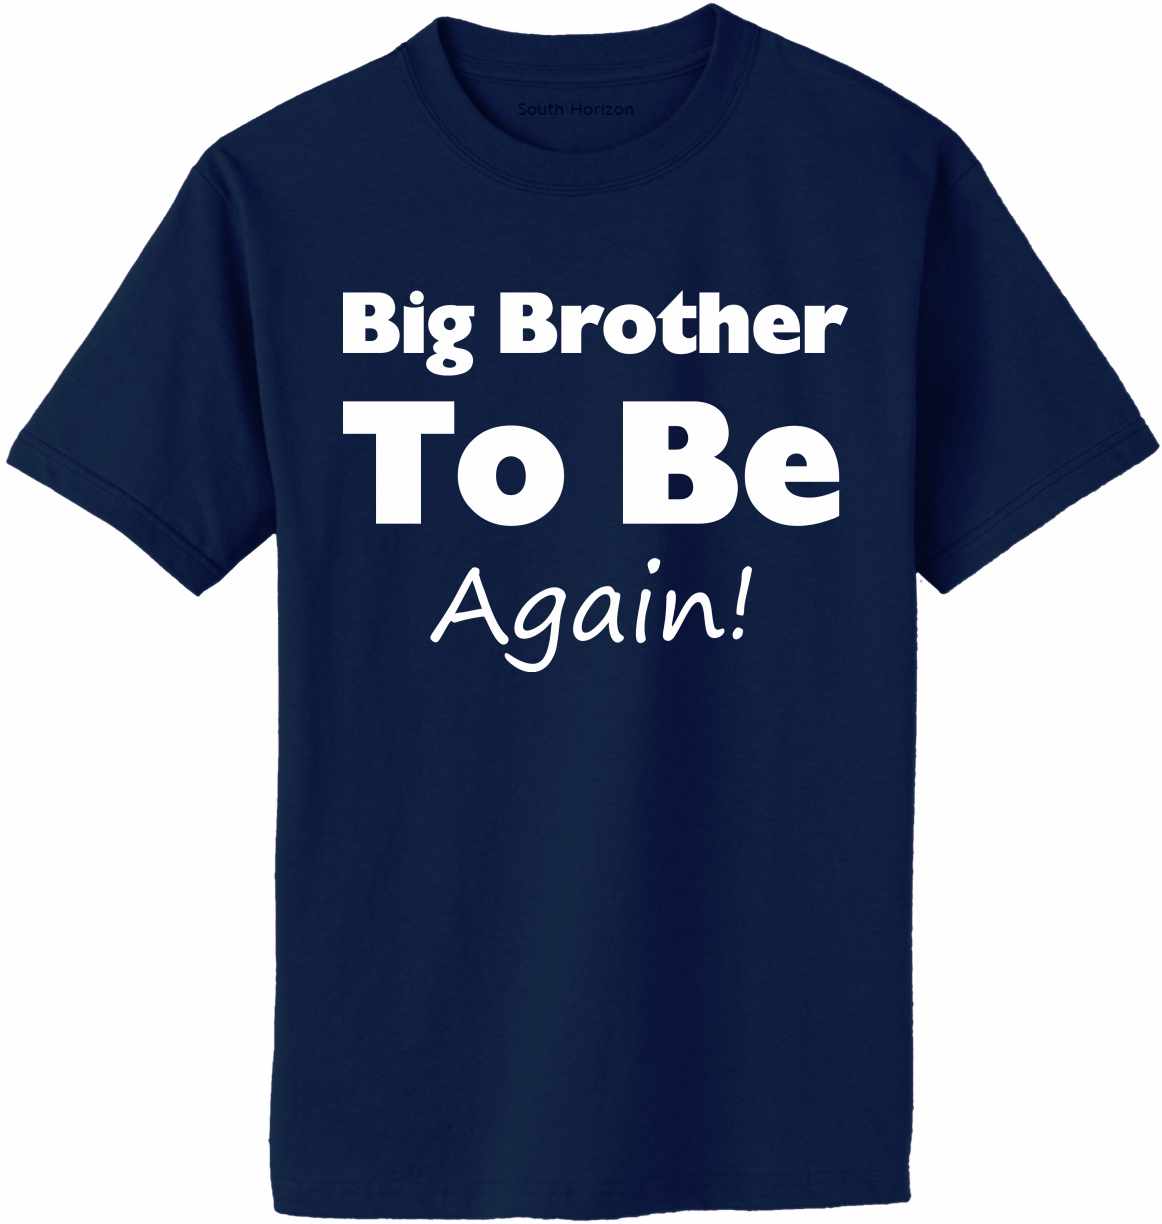 Big Brother To Be Again Adult T-Shirt (#864-1)